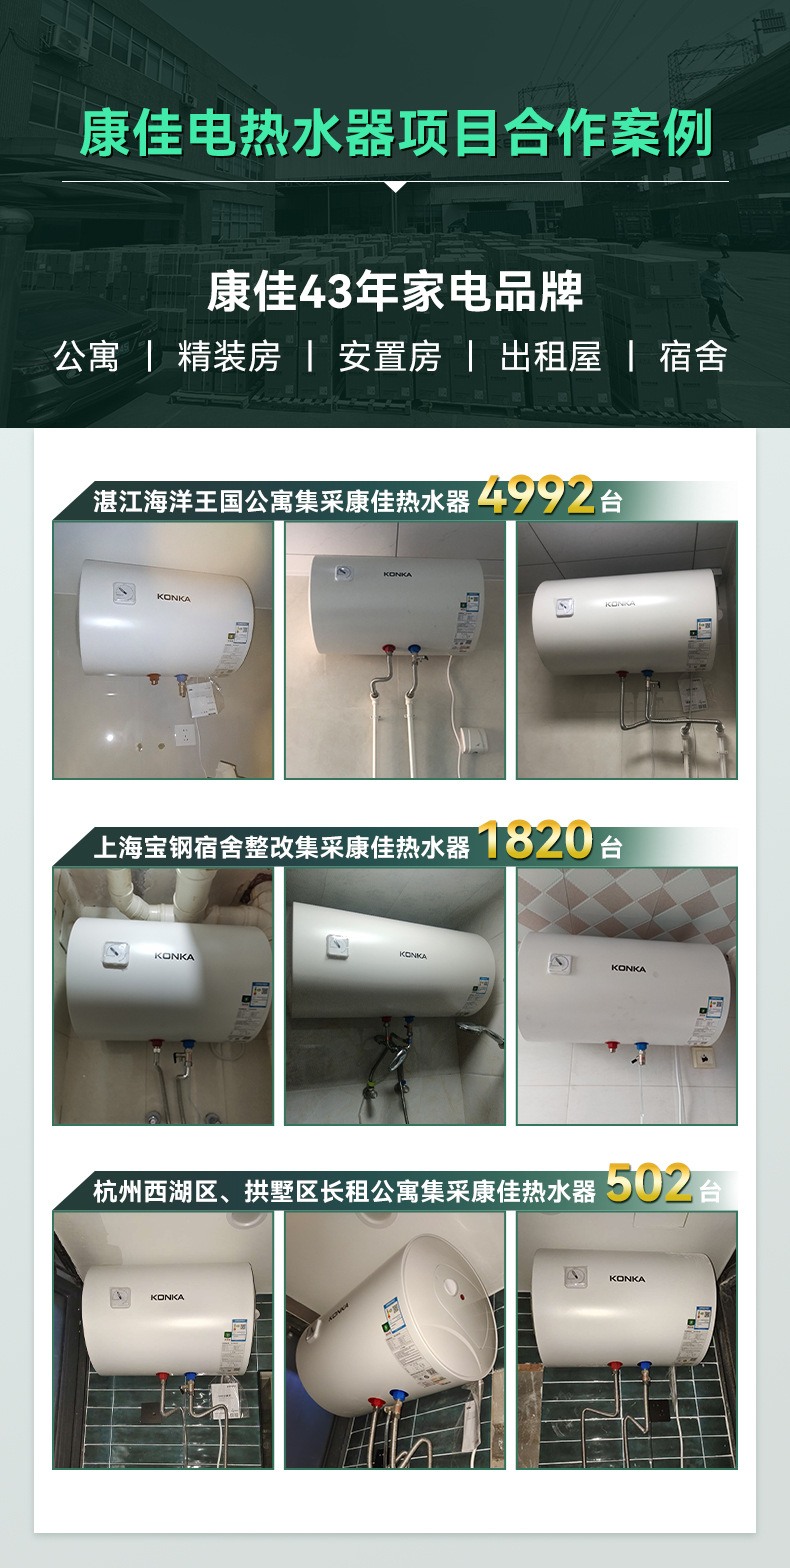 Konka Storage Water Heater Household High-power Energy-saving Double-anti-quick-heating Electric Water Heater Wholesale